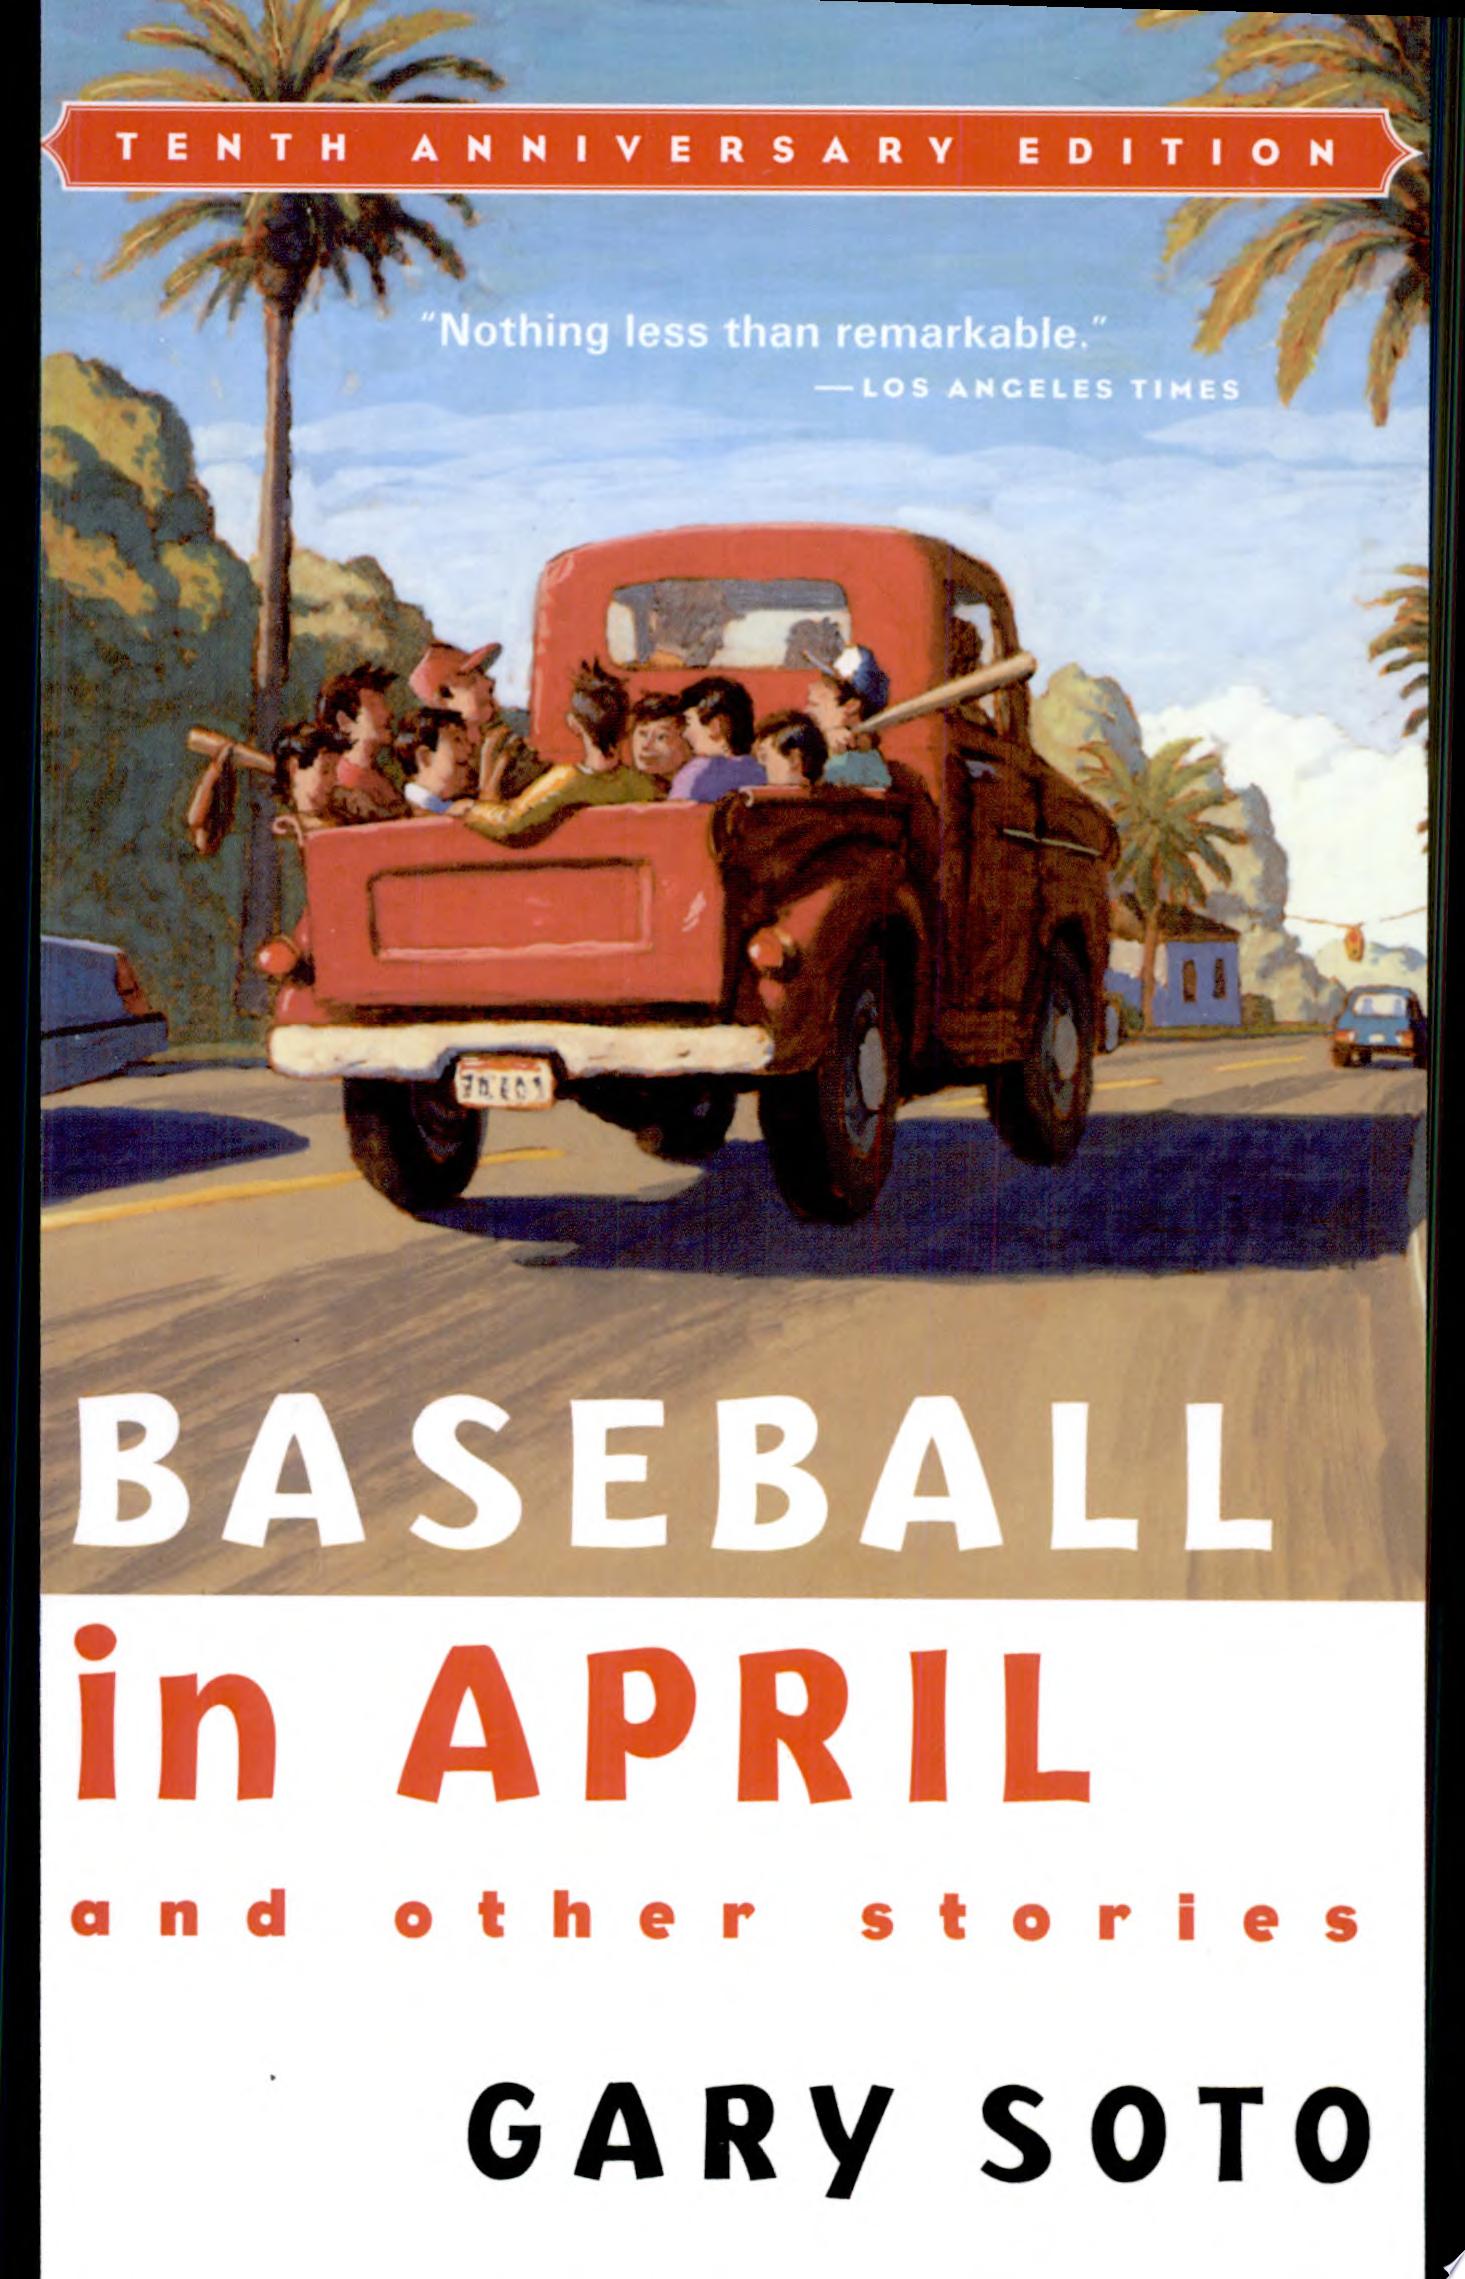 Image for "Baseball in April and Other Stories"